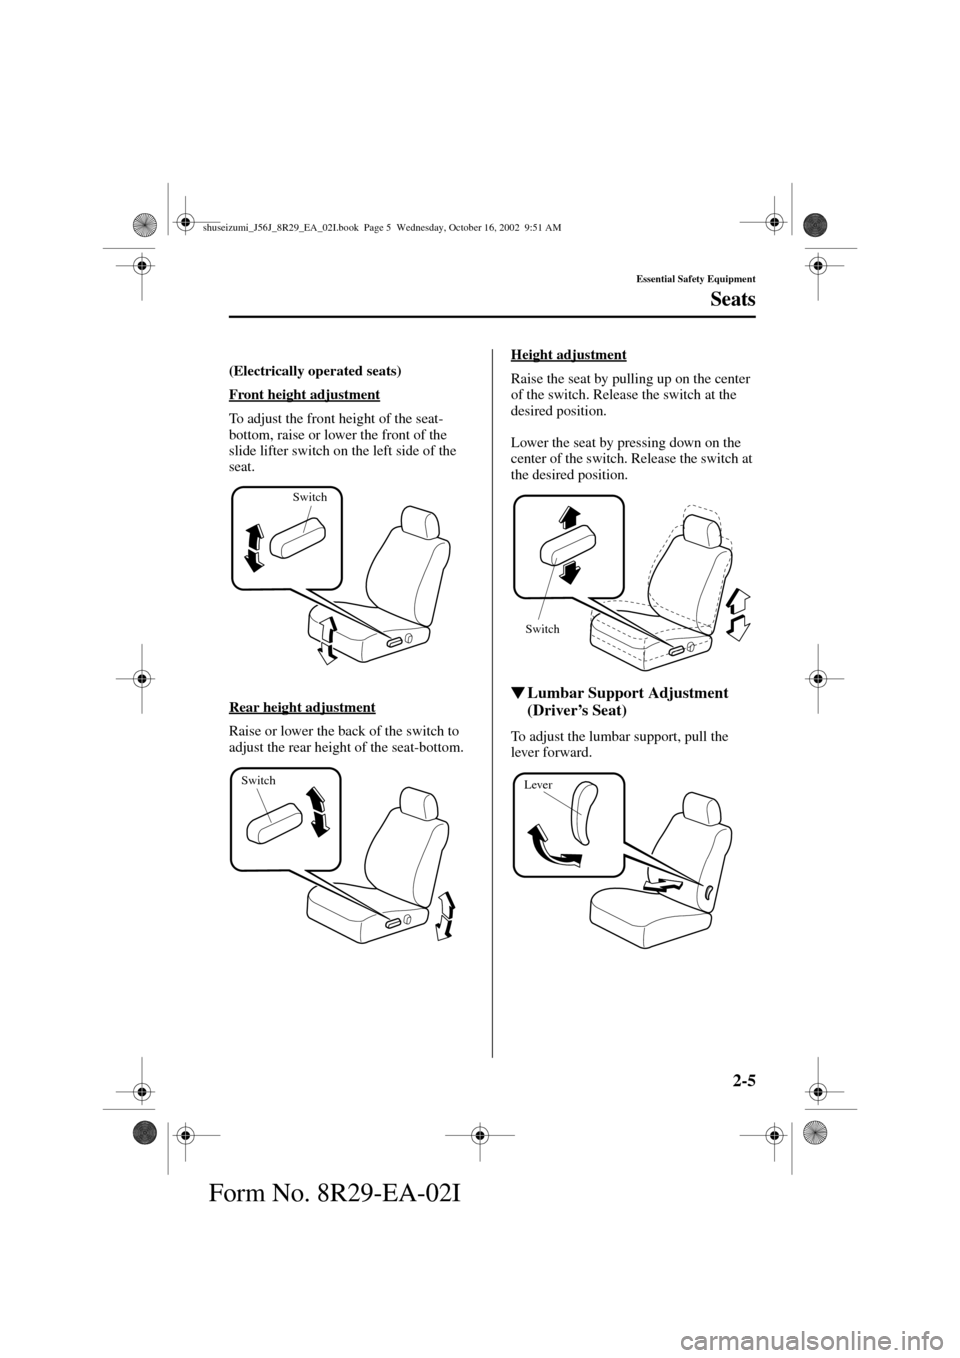 MAZDA MODEL 6 2003  Owners Manual (in English) 2-5
Essential Safety Equipment
Seats
Form No. 8R29-EA-02I
(Electrically operated seats)
 
Front height adjustment
To adjust the front height of the seat-
bottom, raise or lower the front of the 
slide